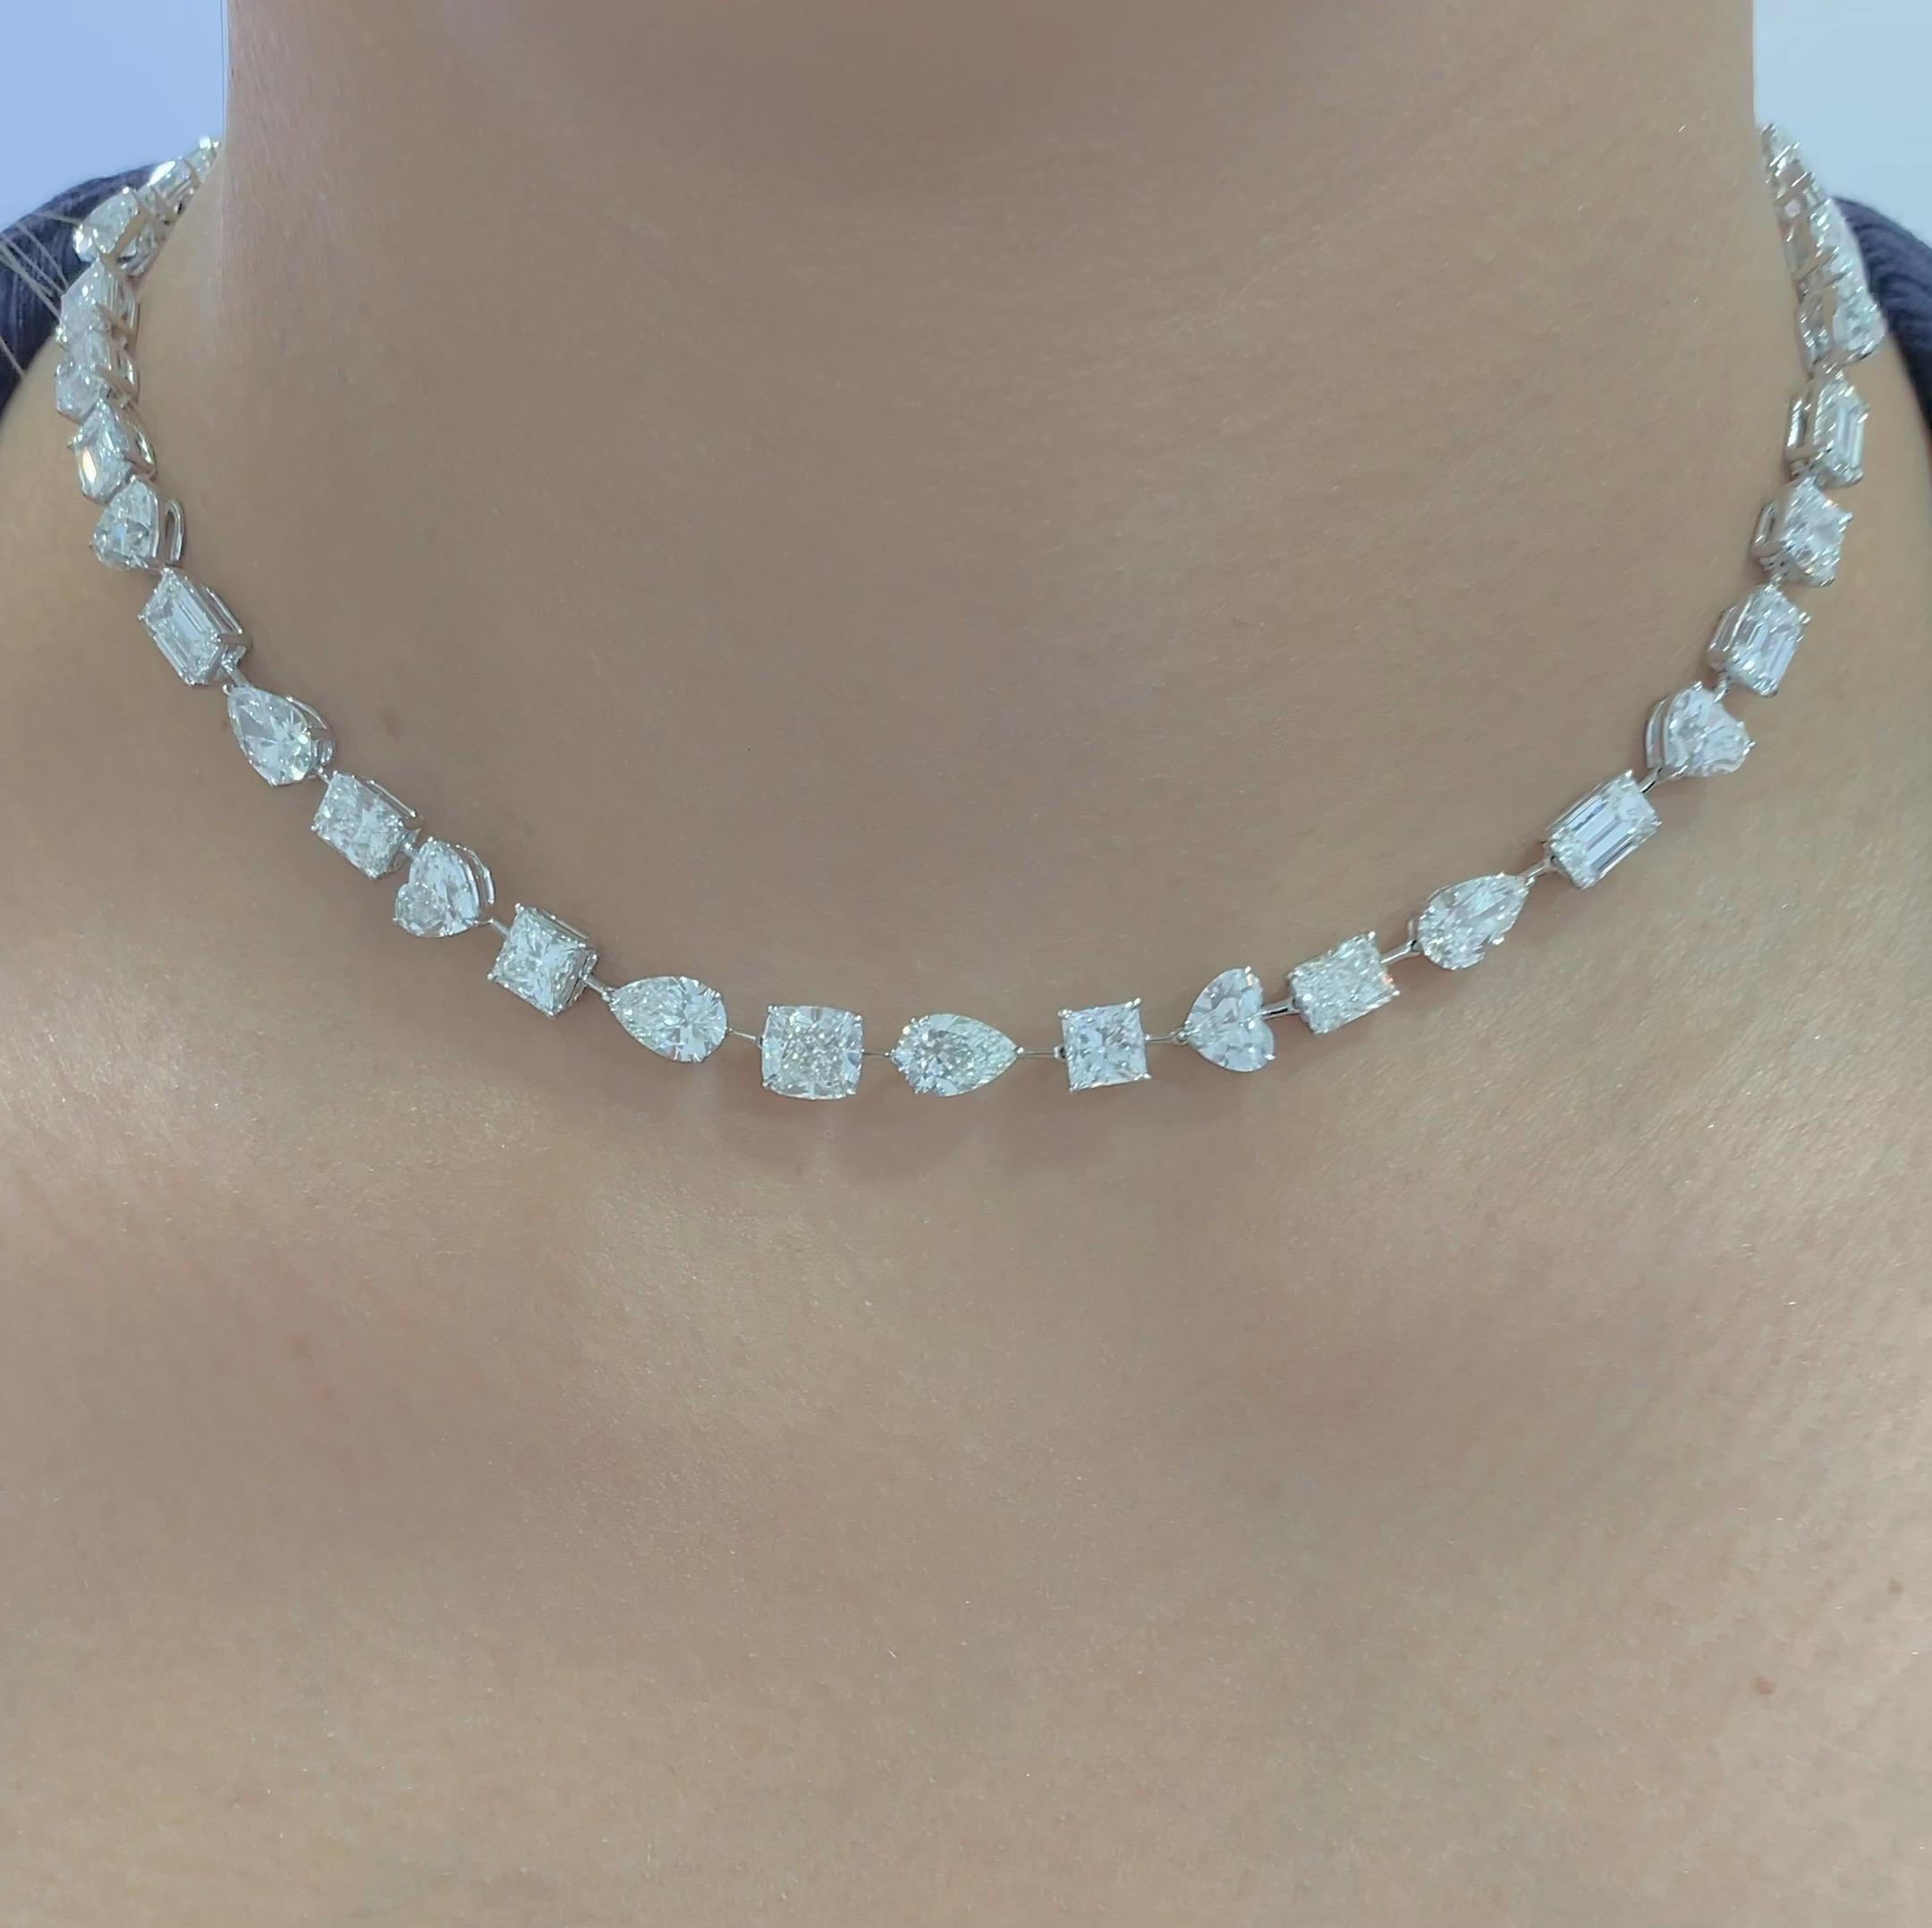 From Emilio Jewelry, a well known and respected wholesaler/dealer located on New York’s iconic Fifth Avenue,
A truly special and classic diamond necklace that stands out from the rest out there! Featuring each and every diamond weighing 1.00 Carat